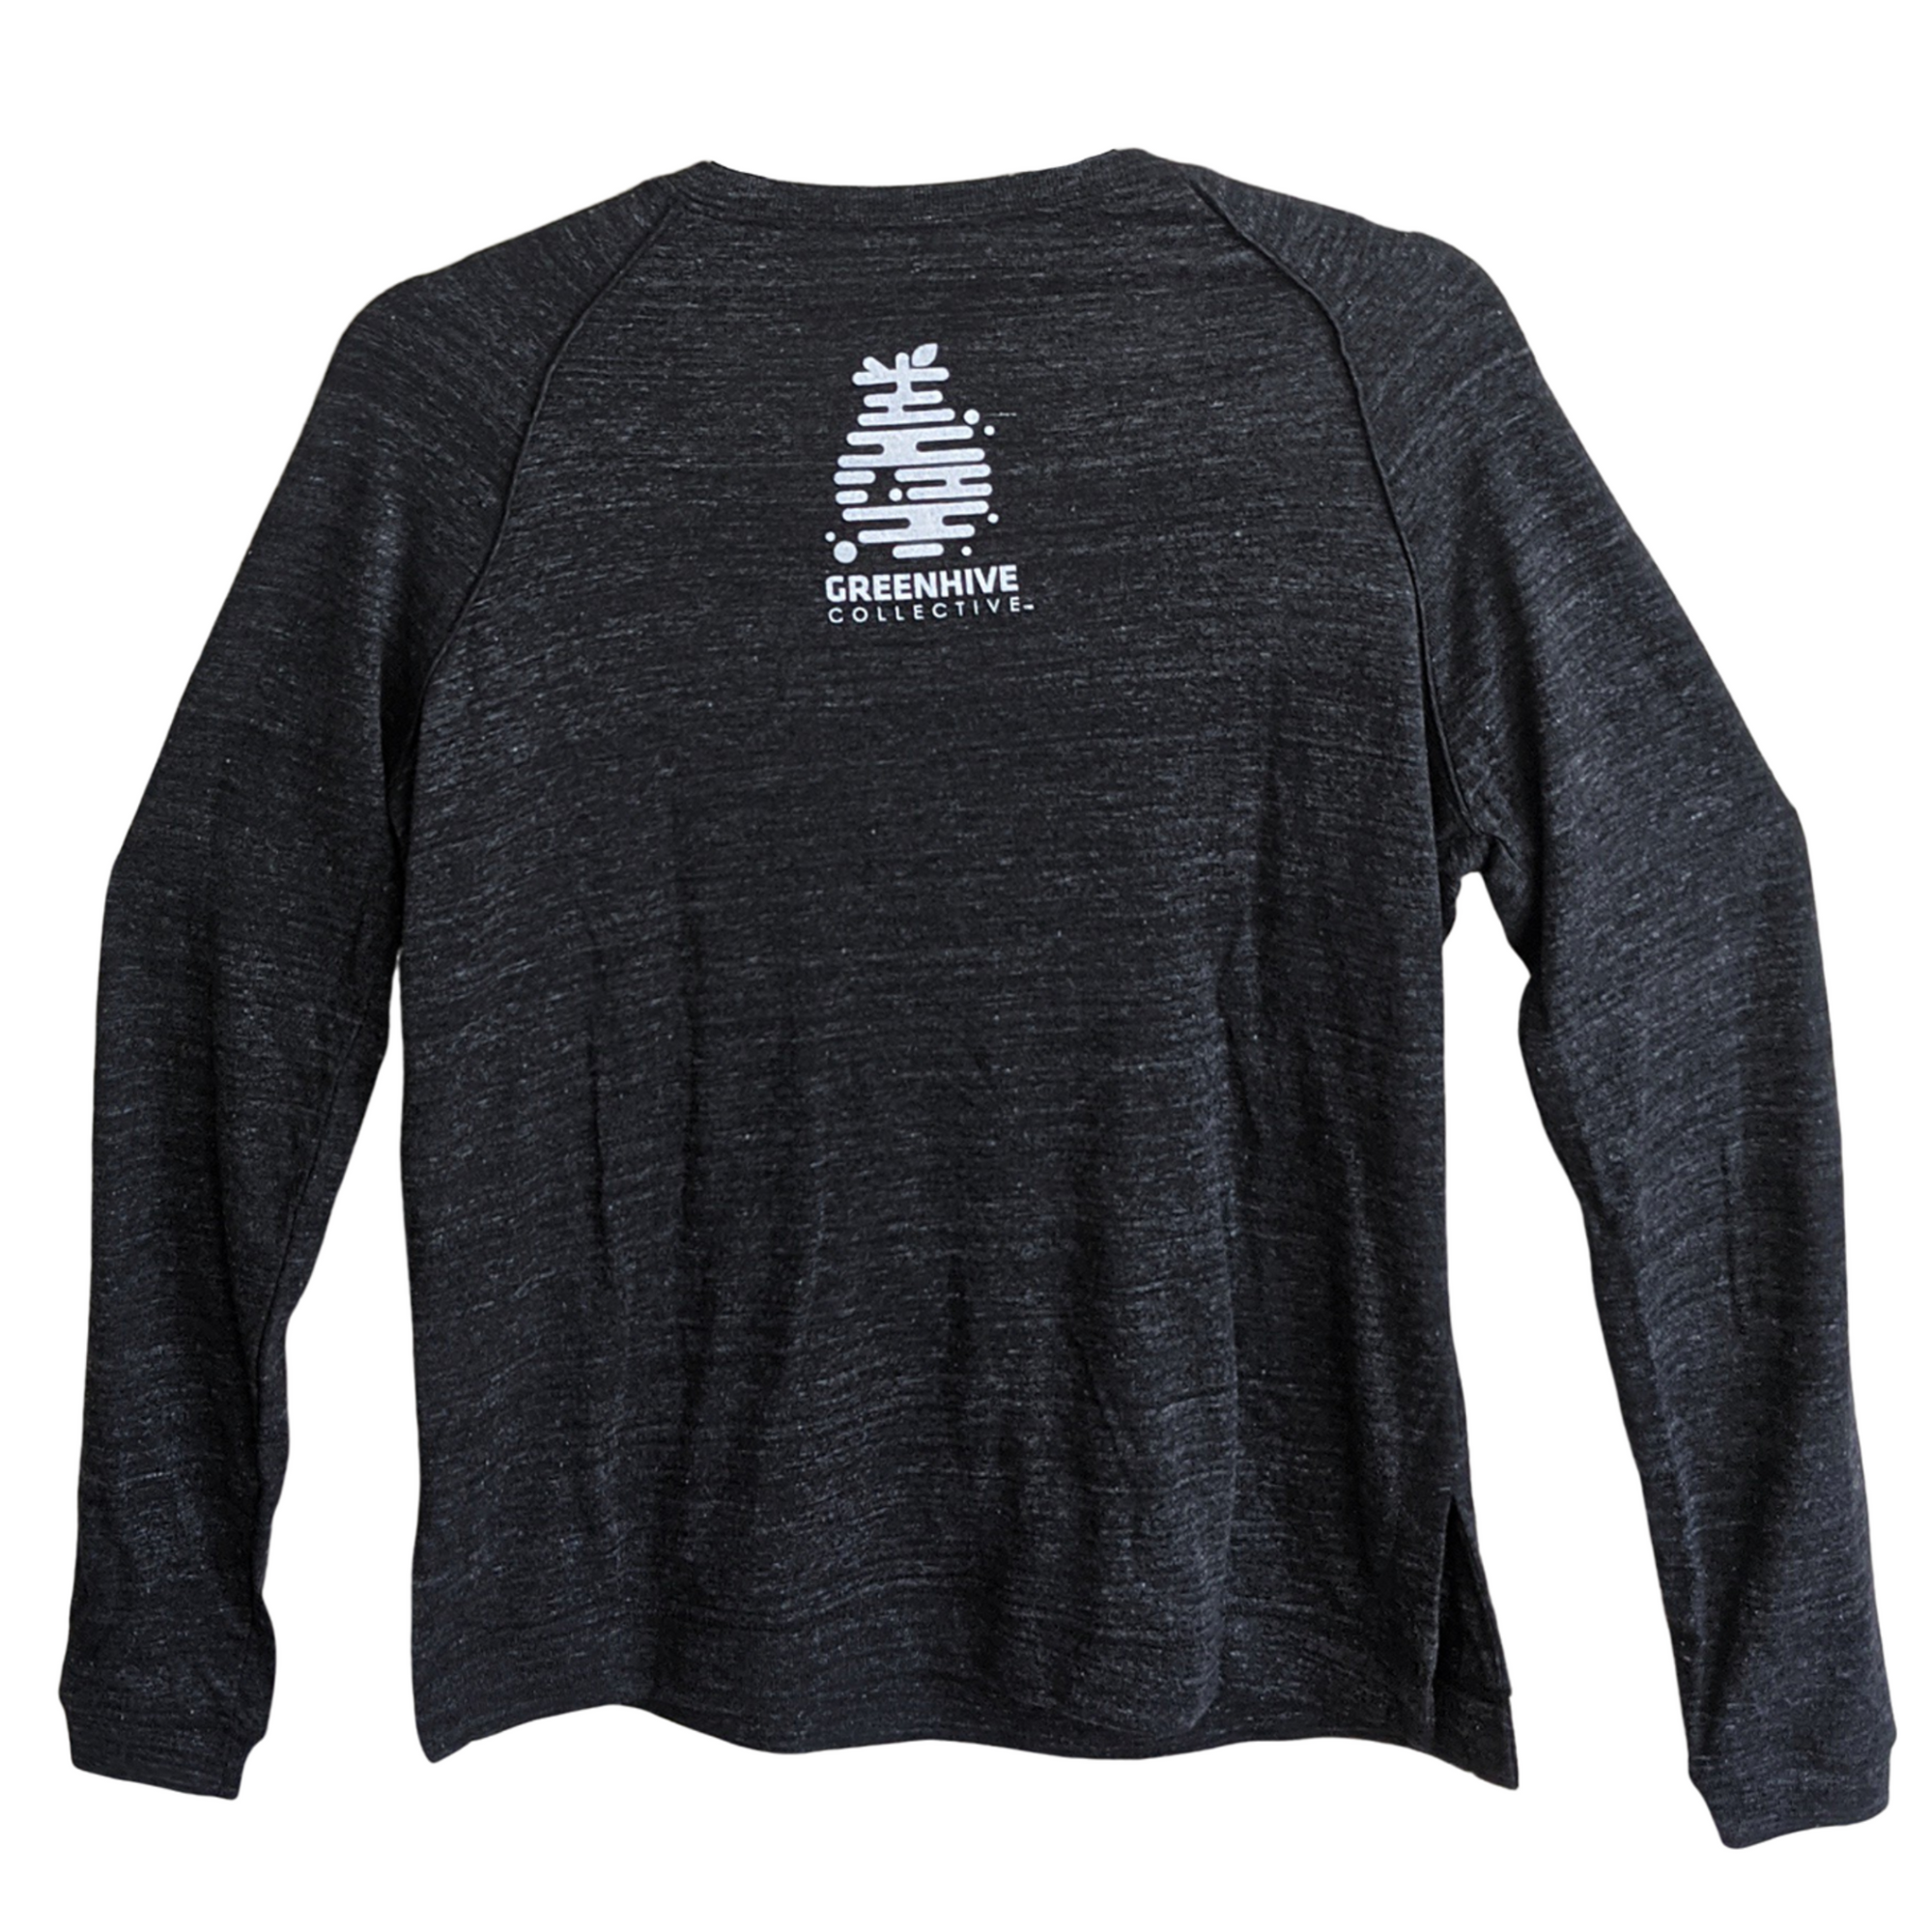 Polar Bear Long Sleeve (Women's) - GreenHive Collective - ECO-FRIENDLY APPAREL